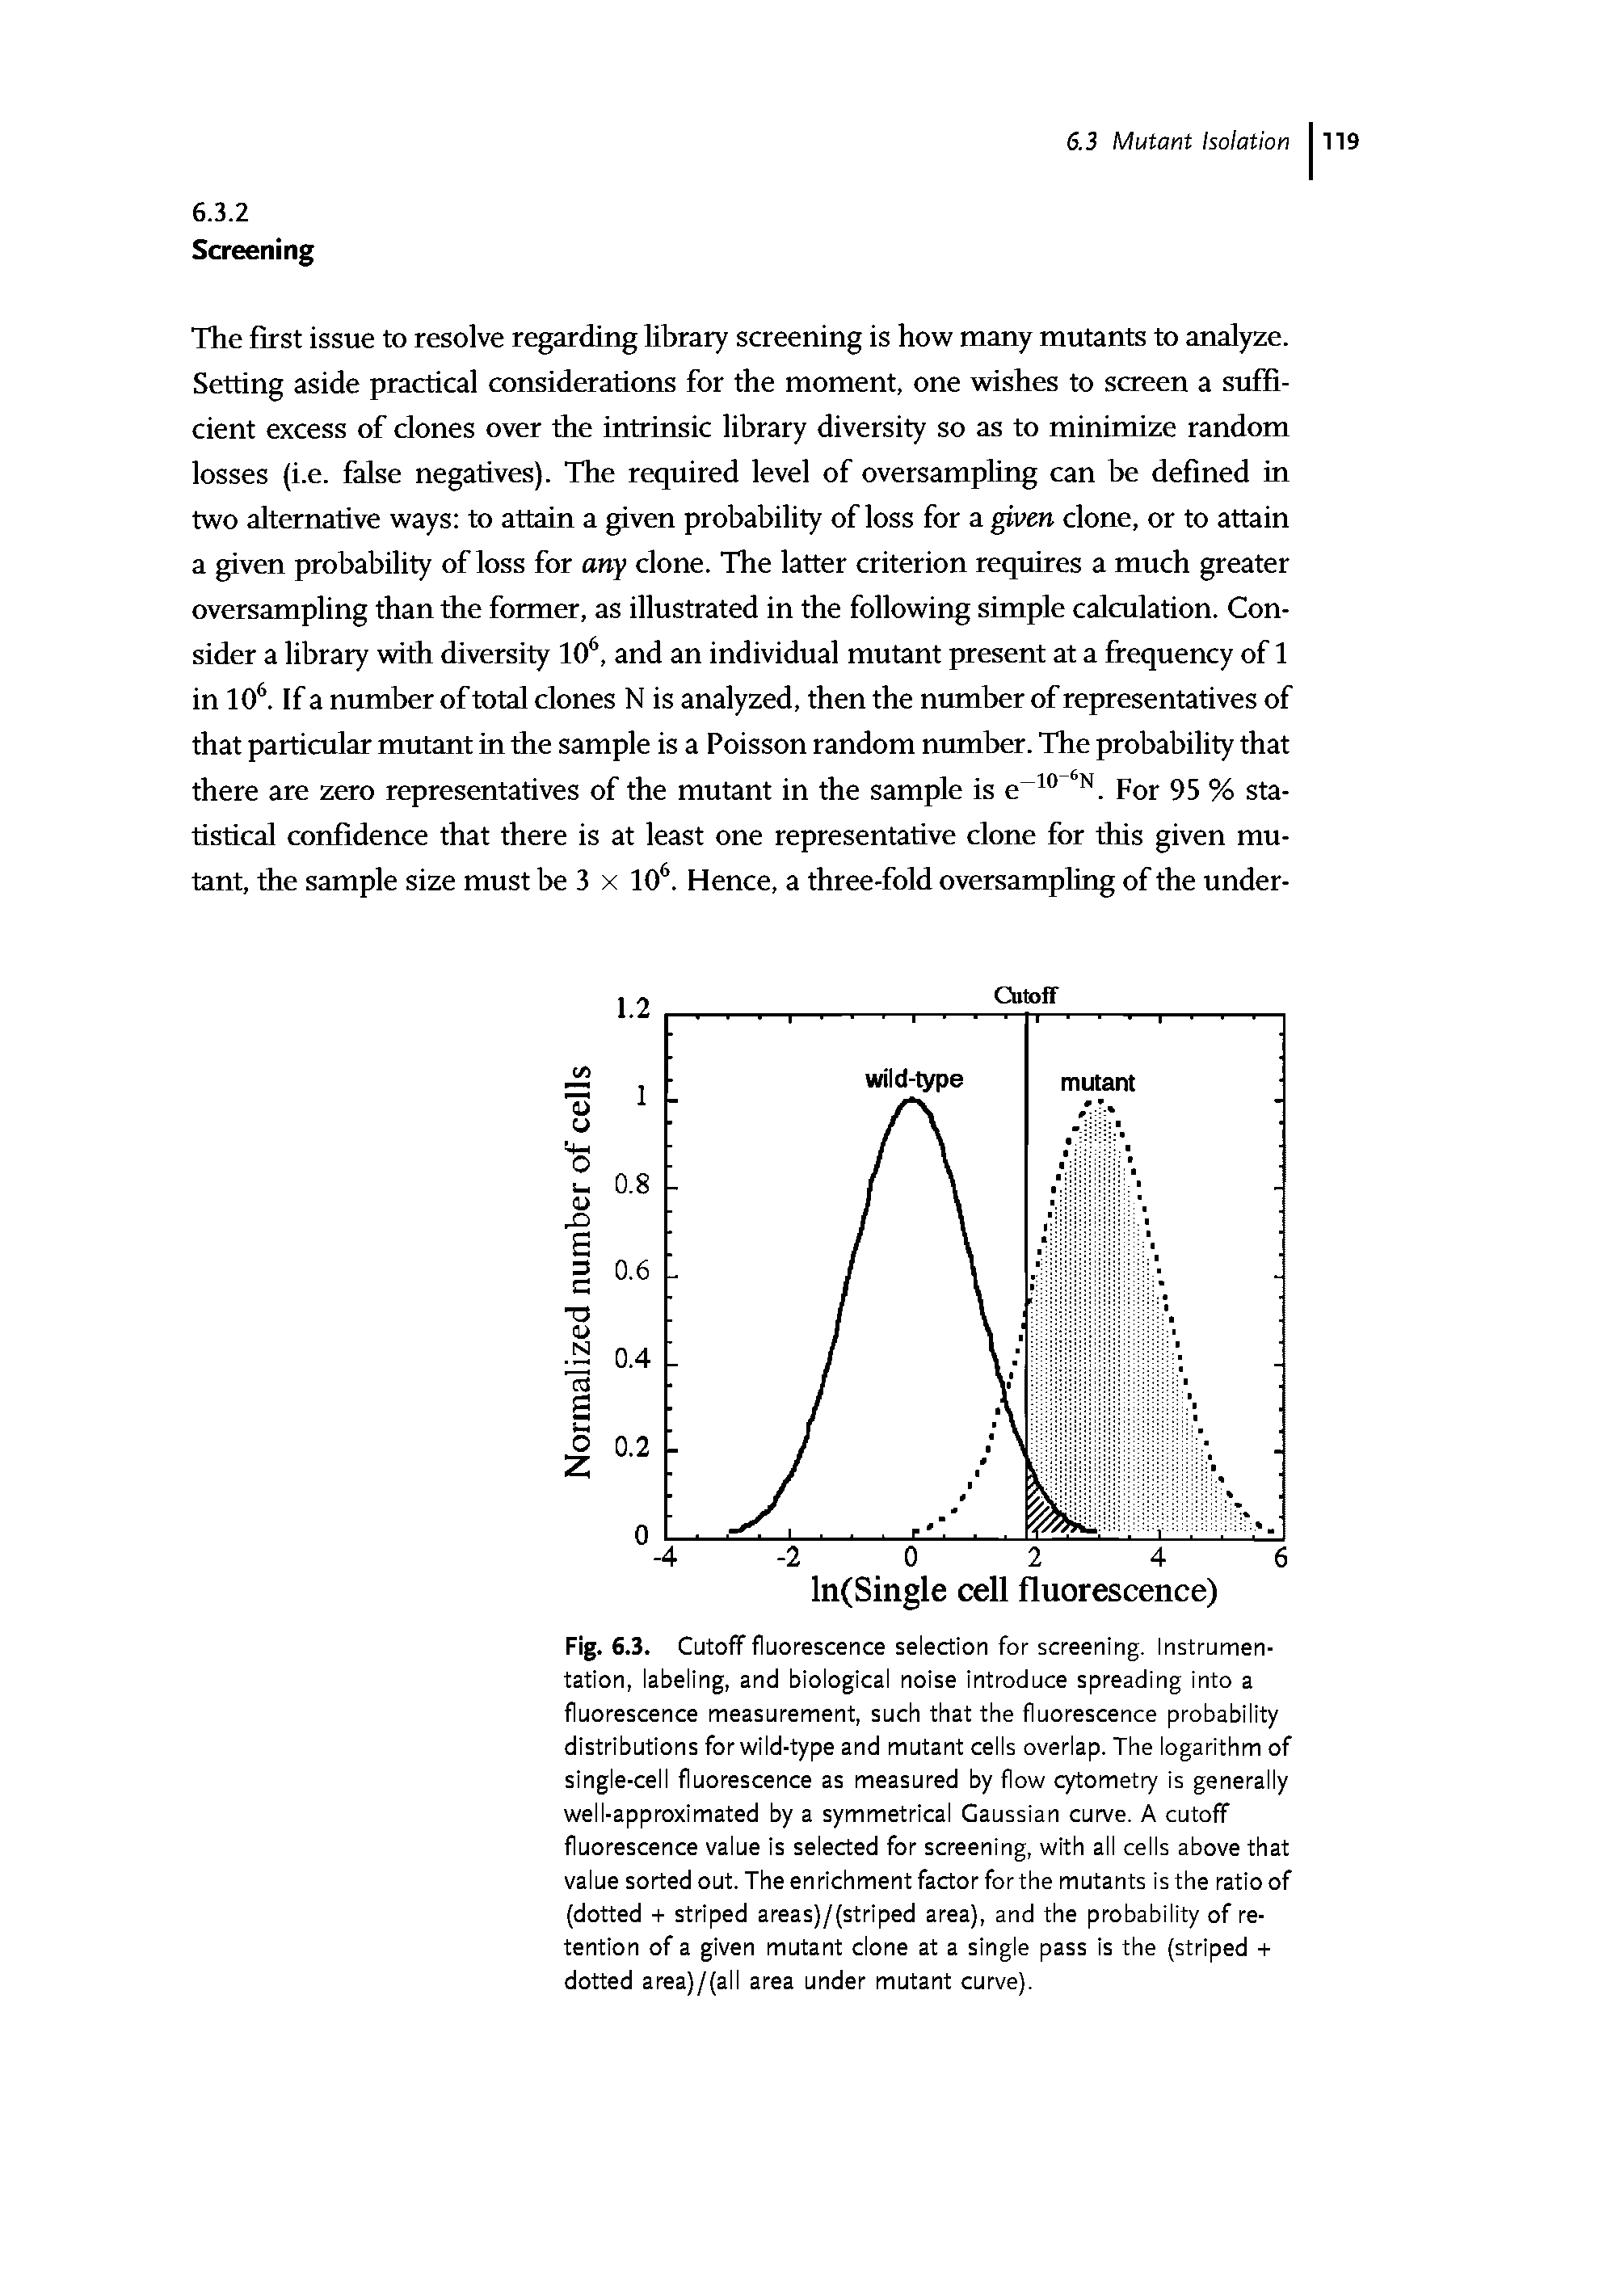 Fig. 6.3. Cutoff fluorescence selection for screening. Instrumentation, labeling, and biological noise introduce spreading into a fluorescence measurement, such that the fluorescence probability distributions for wild-type and mutant cells overlap. The logarithm of single-cell fluorescence as measured by flow cytometry is generally well-approximated by a symmetrical Gaussian curve. A cutoff fluorescence value is selected for screening, with all cells above that value sorted out. The enrichment factor forthe mutants is the ratio of (dotted + striped areas)/(striped area), and the probability of retention of a given mutant clone at a single pass is the (striped + dotted area)/(all area under mutant curve).